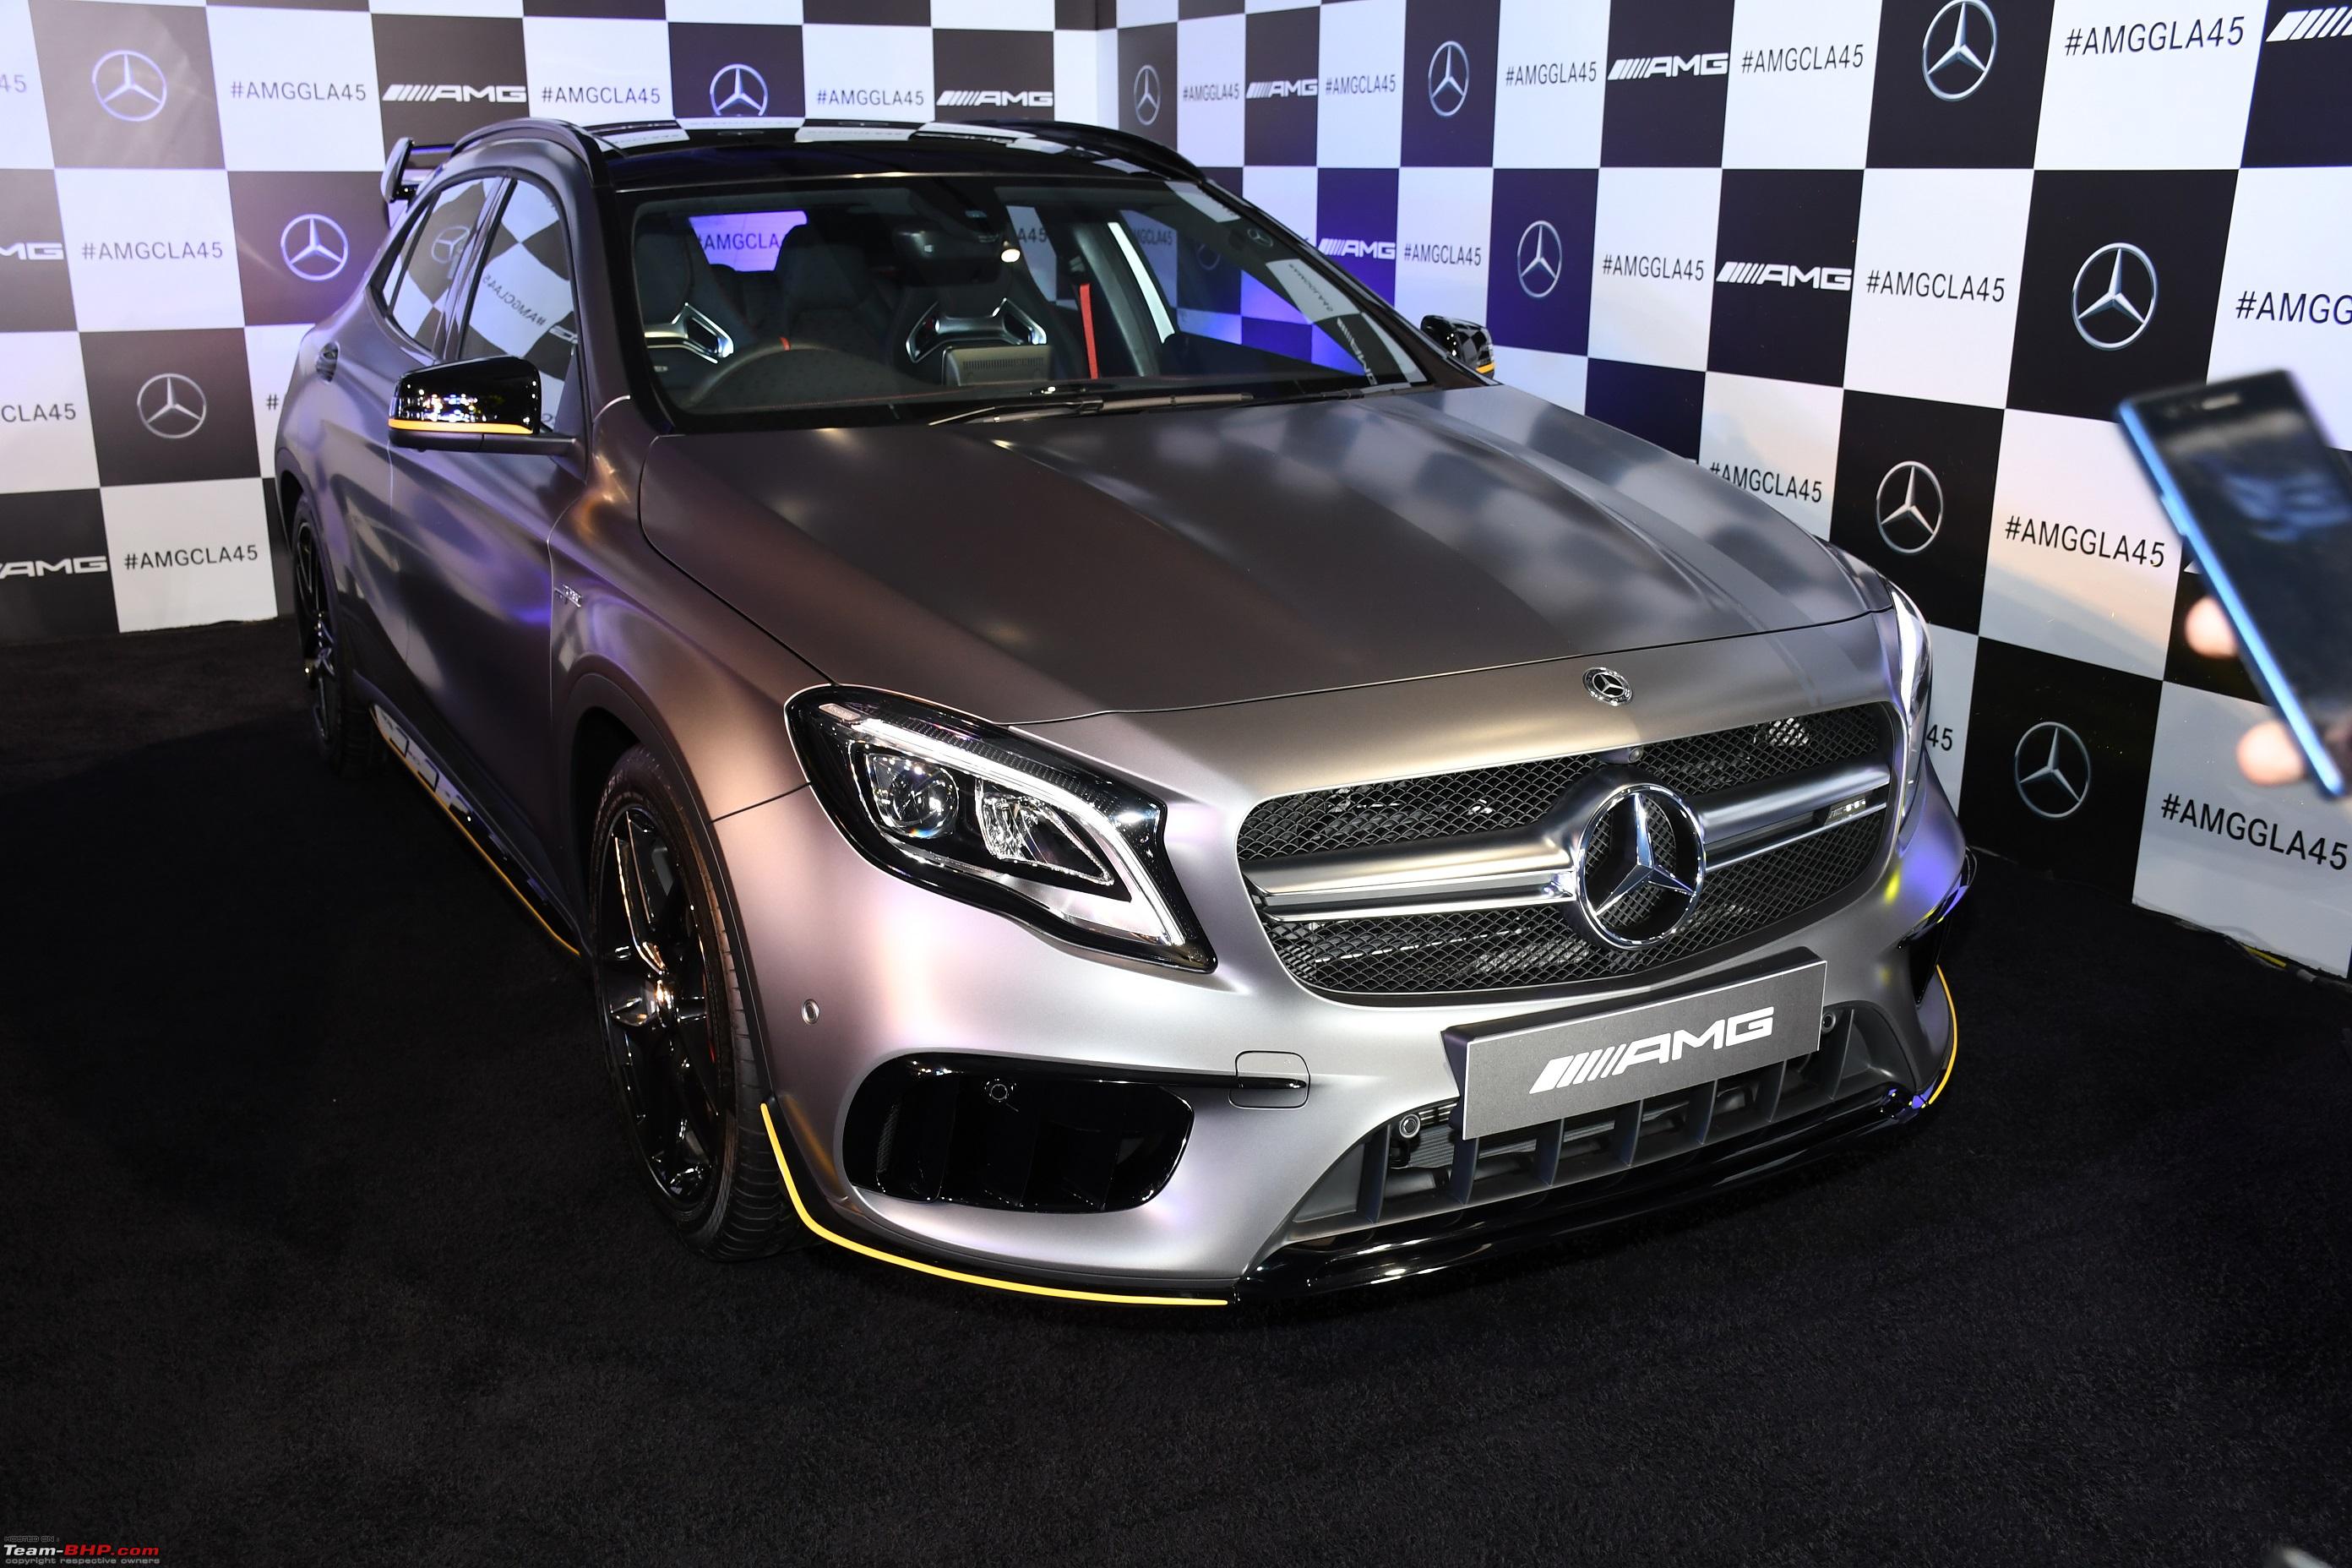 Mercedes Amg Cla 45 And Gla 45 Facelift Launched Team Bhp